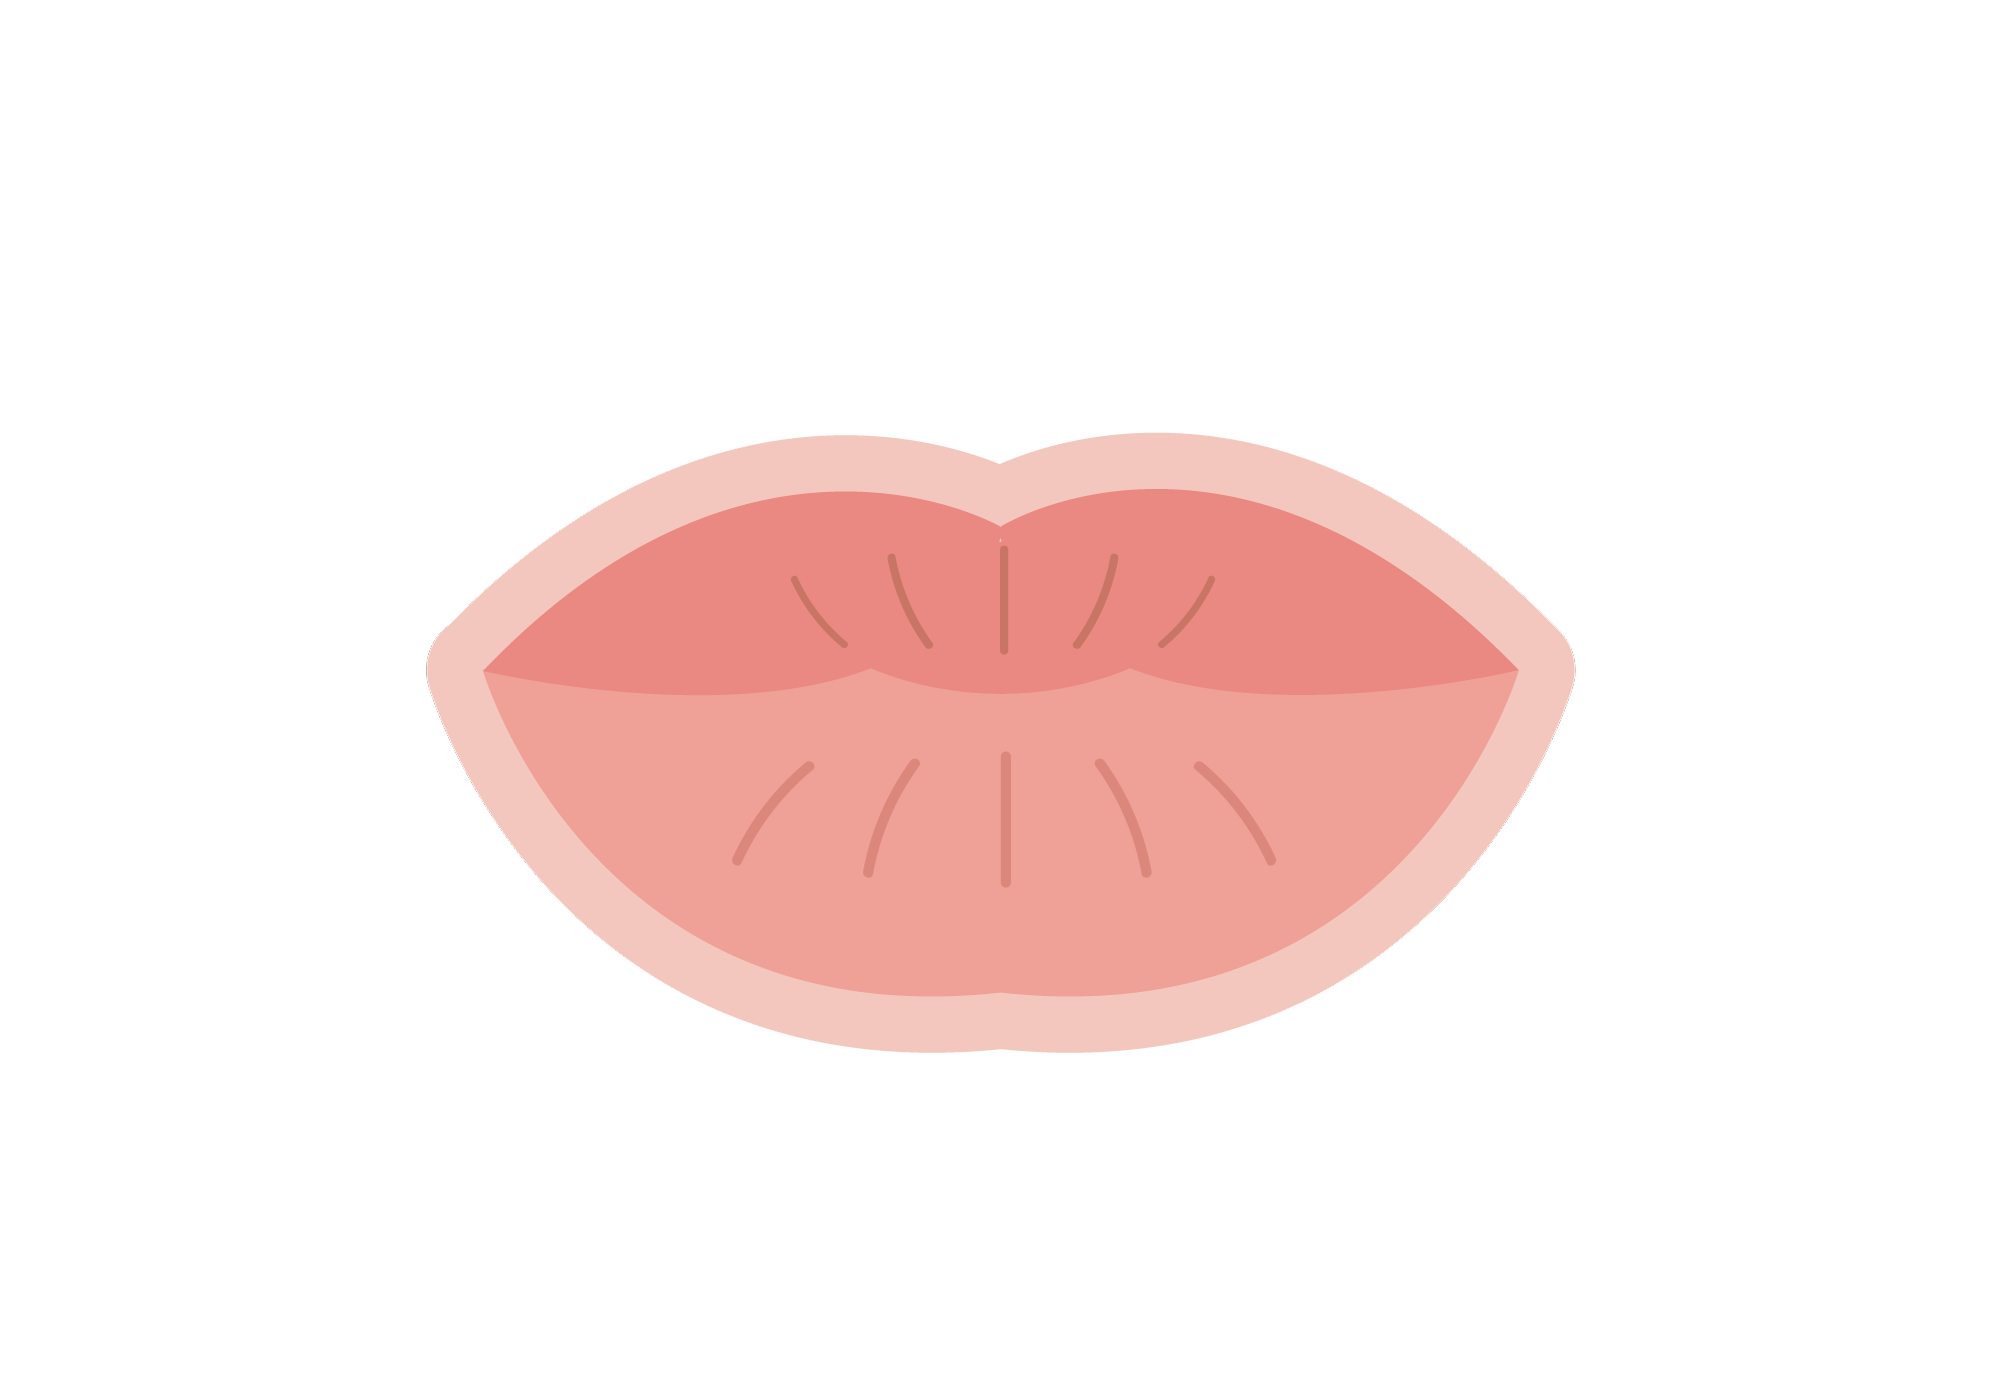 What is it called when you press your lips together? - Quora